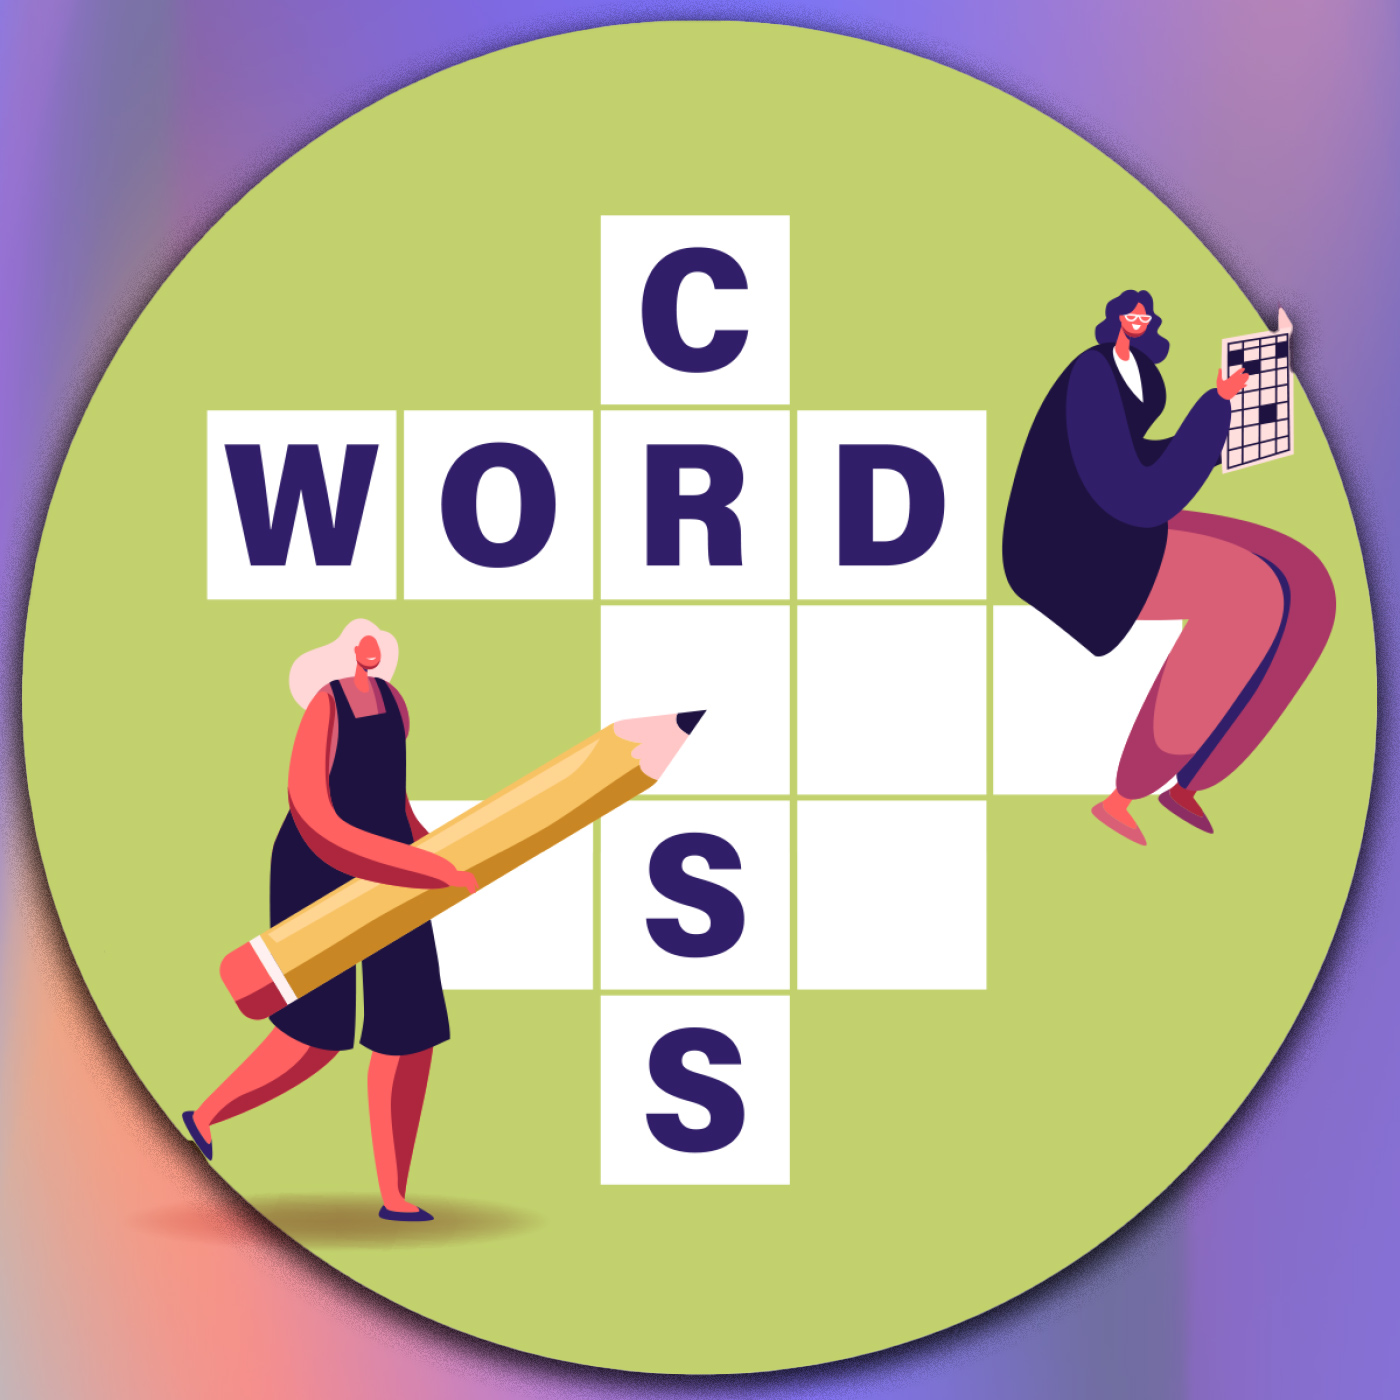 Free Crosswords to Test Your Pop Culture Knowledge